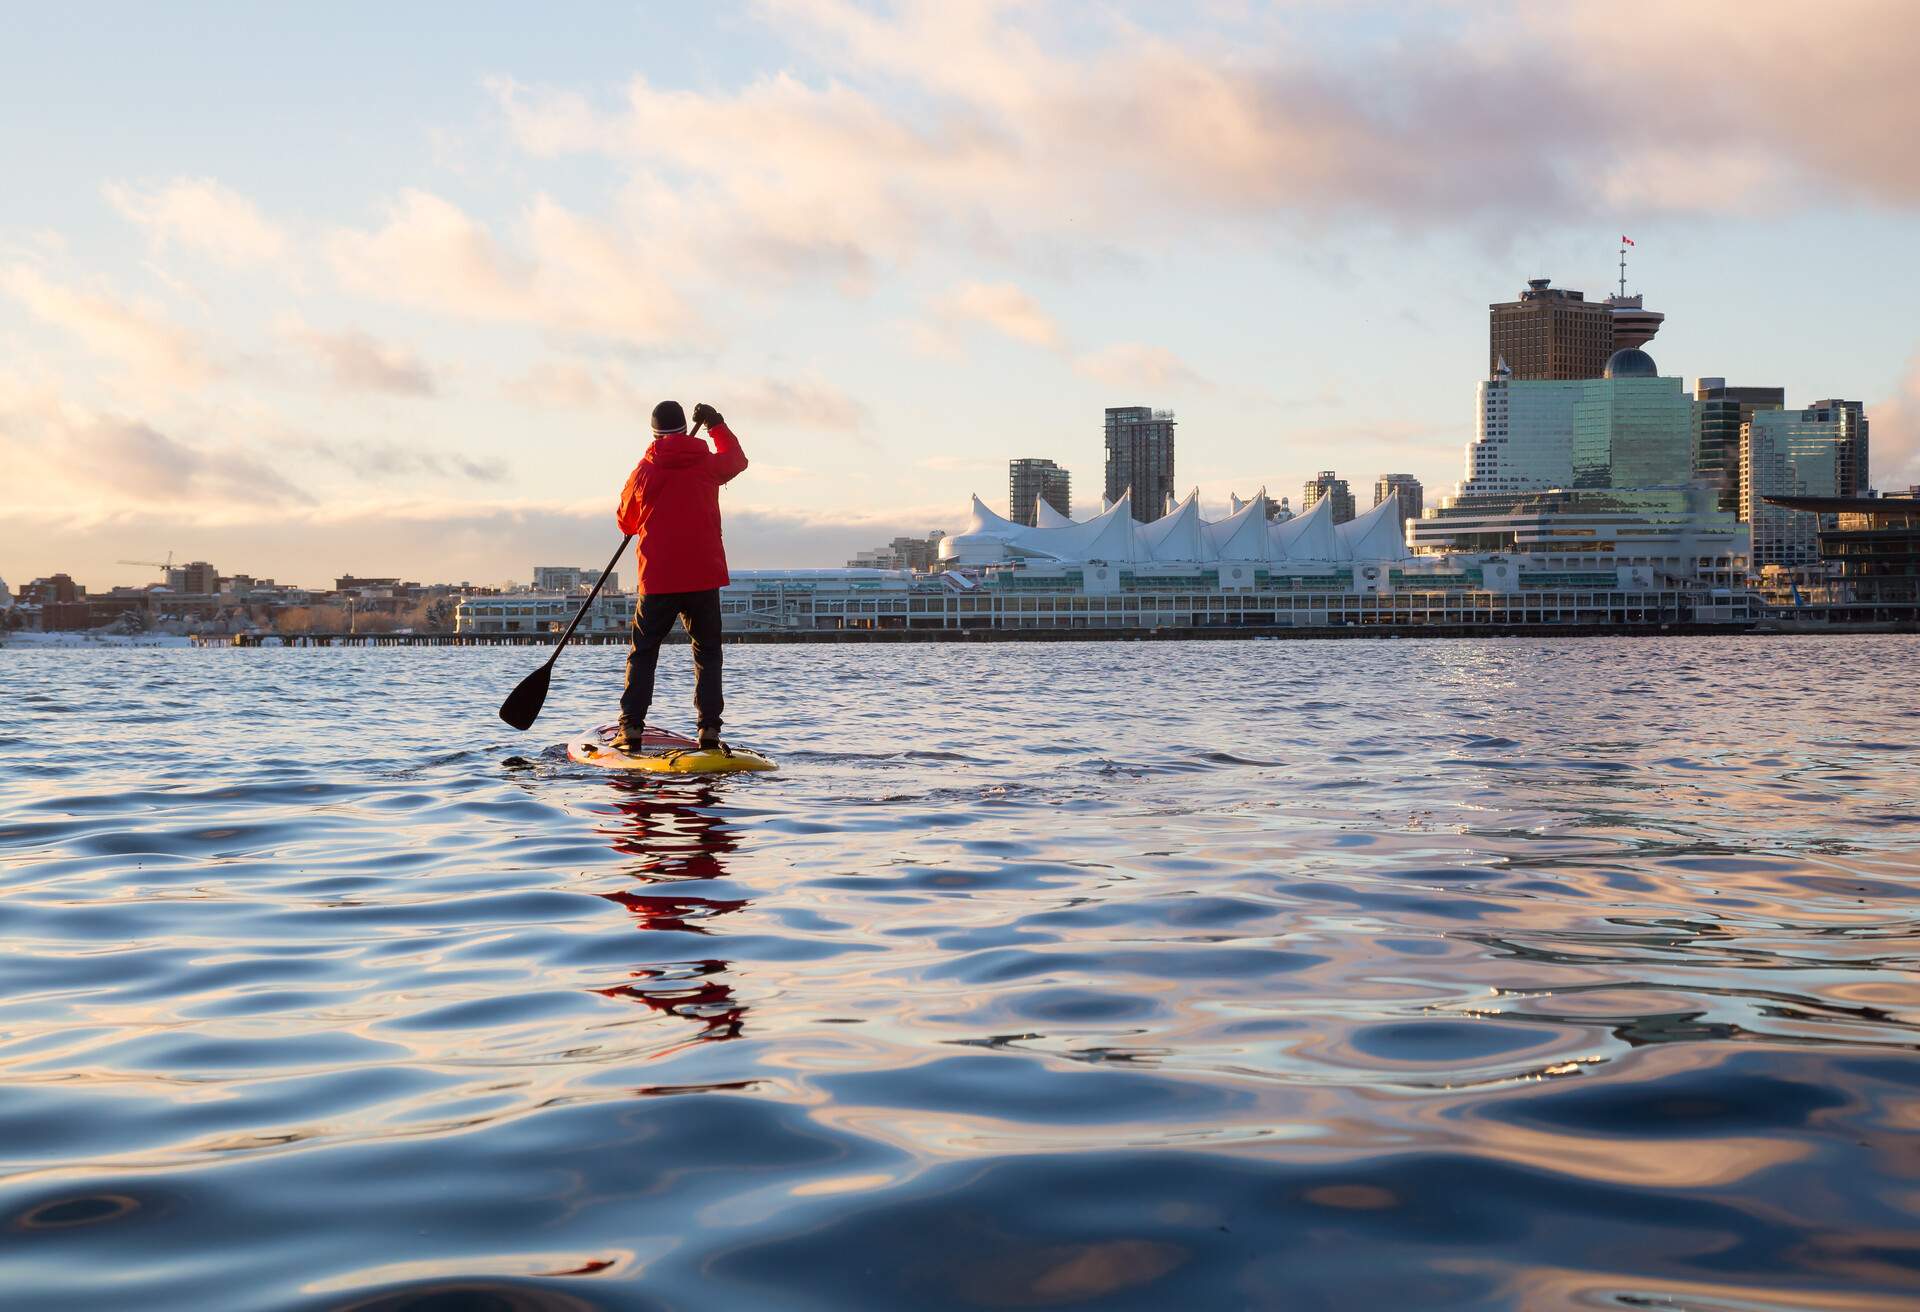 CANADA_VANCOUVER_COAL_HARBOUR_PERSON_PADDLE_BOARDING